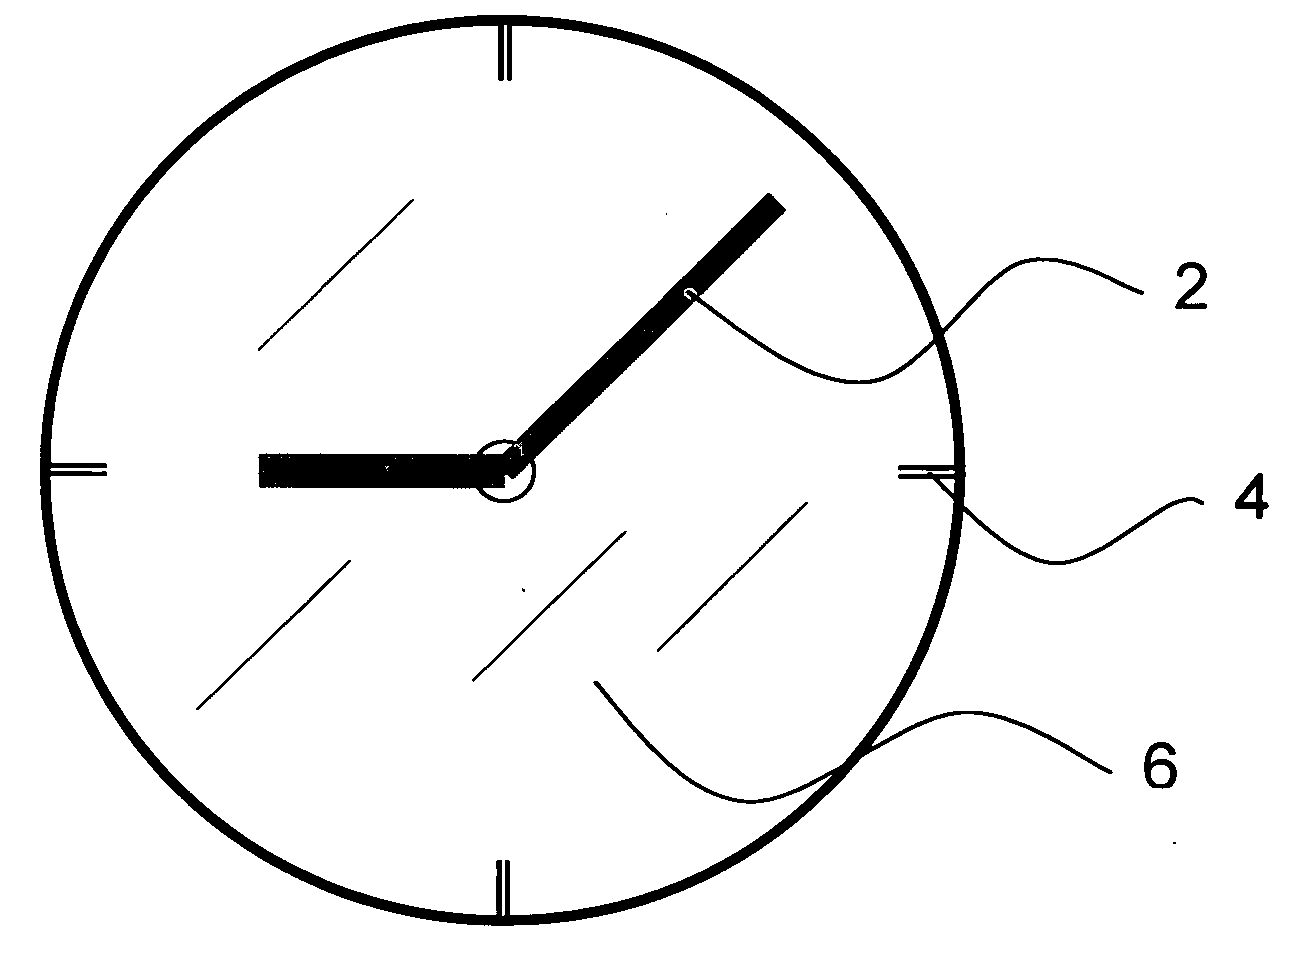 Watch with mirror dial plate